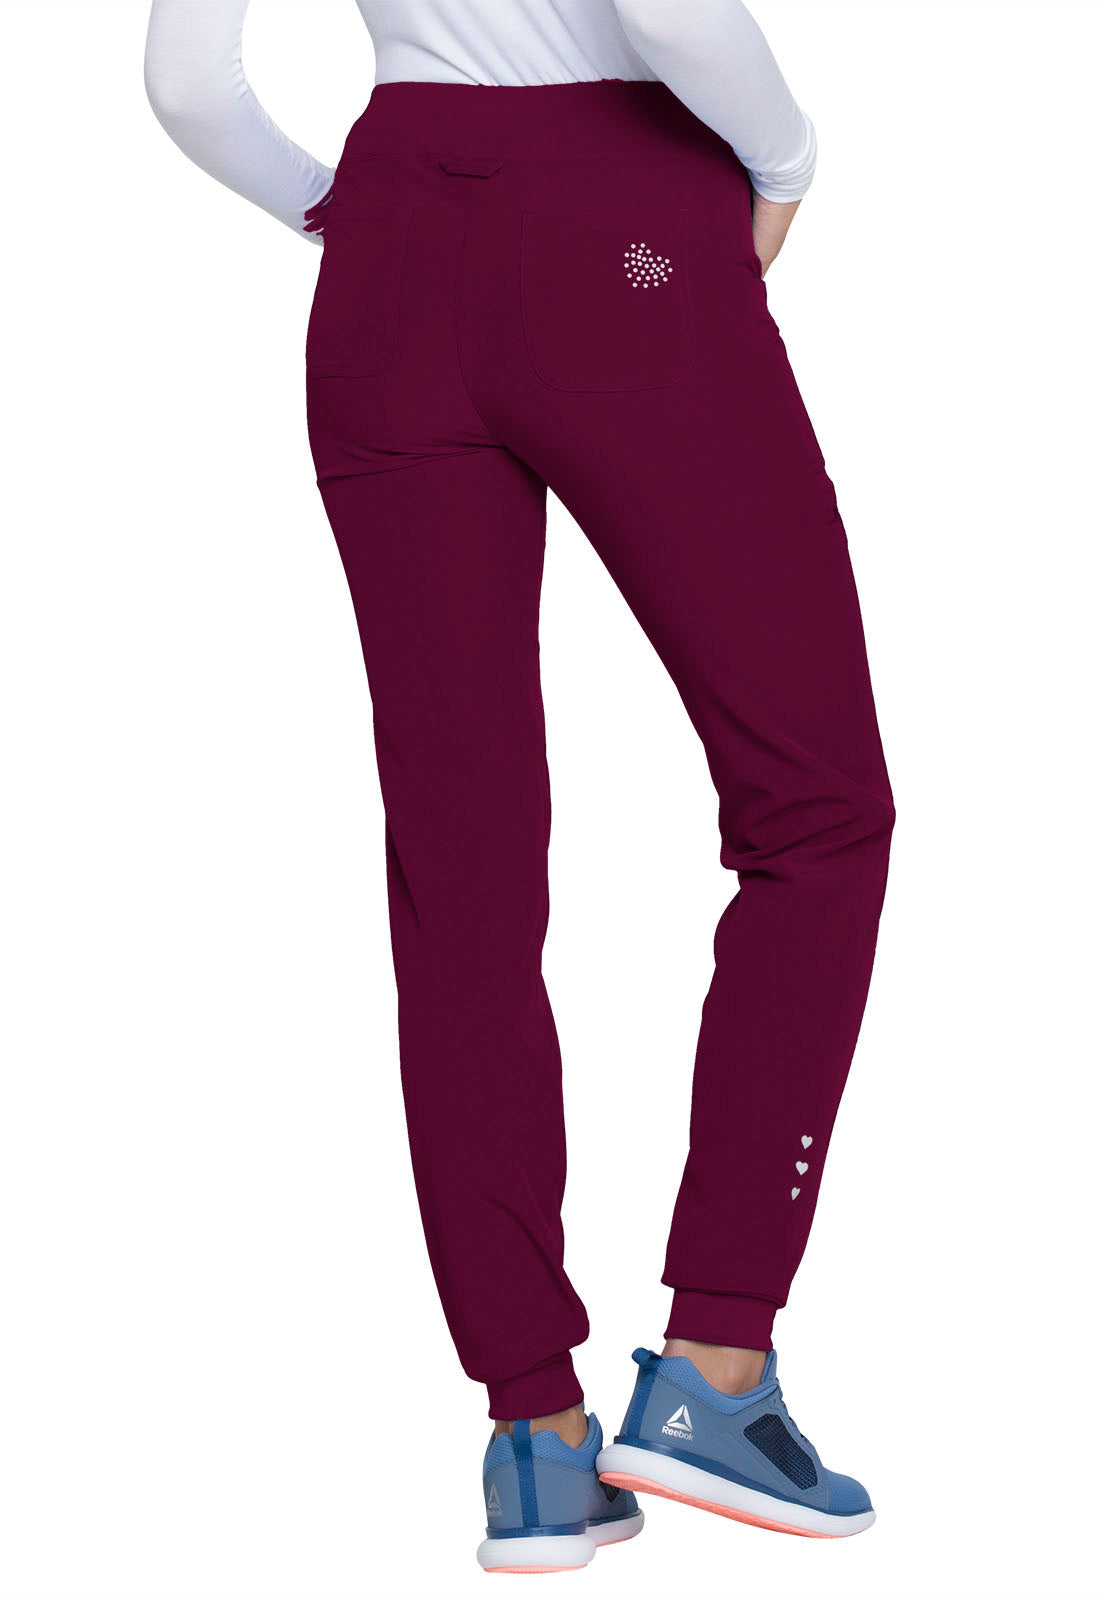 HeartSoul "The Jogger" Low Rise Tapered Leg Pants Wine